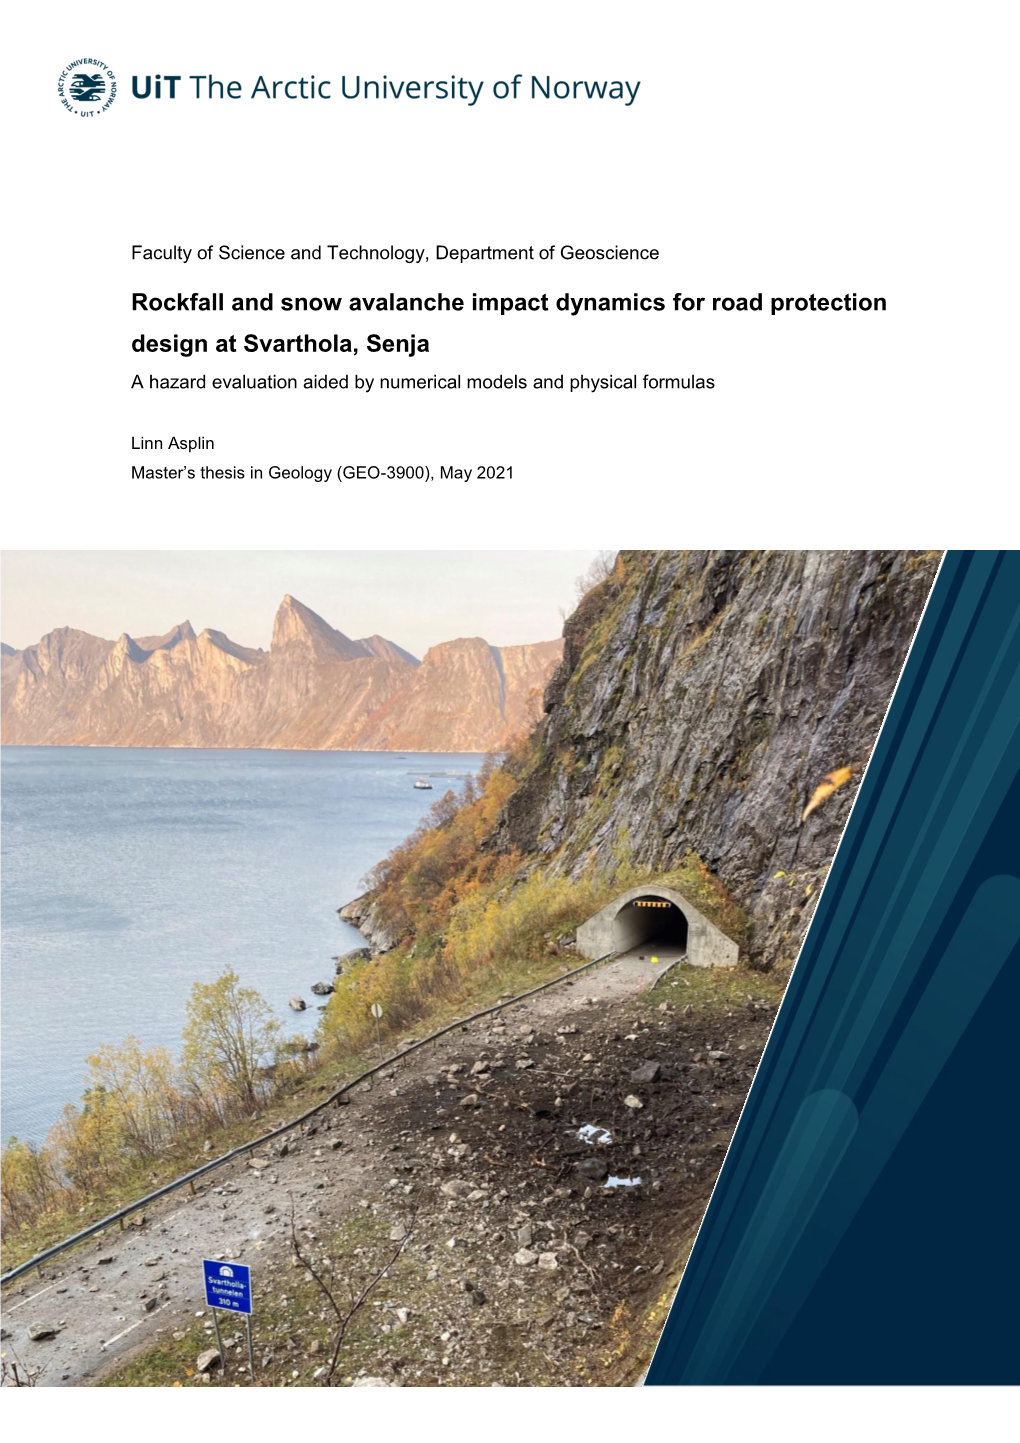 Rockfall and Snow Avalanche Impact Dynamics for Road Protection Design at Svarthola, Senja a Hazard Evaluation Aided by Numerical Models and Physical Formulas